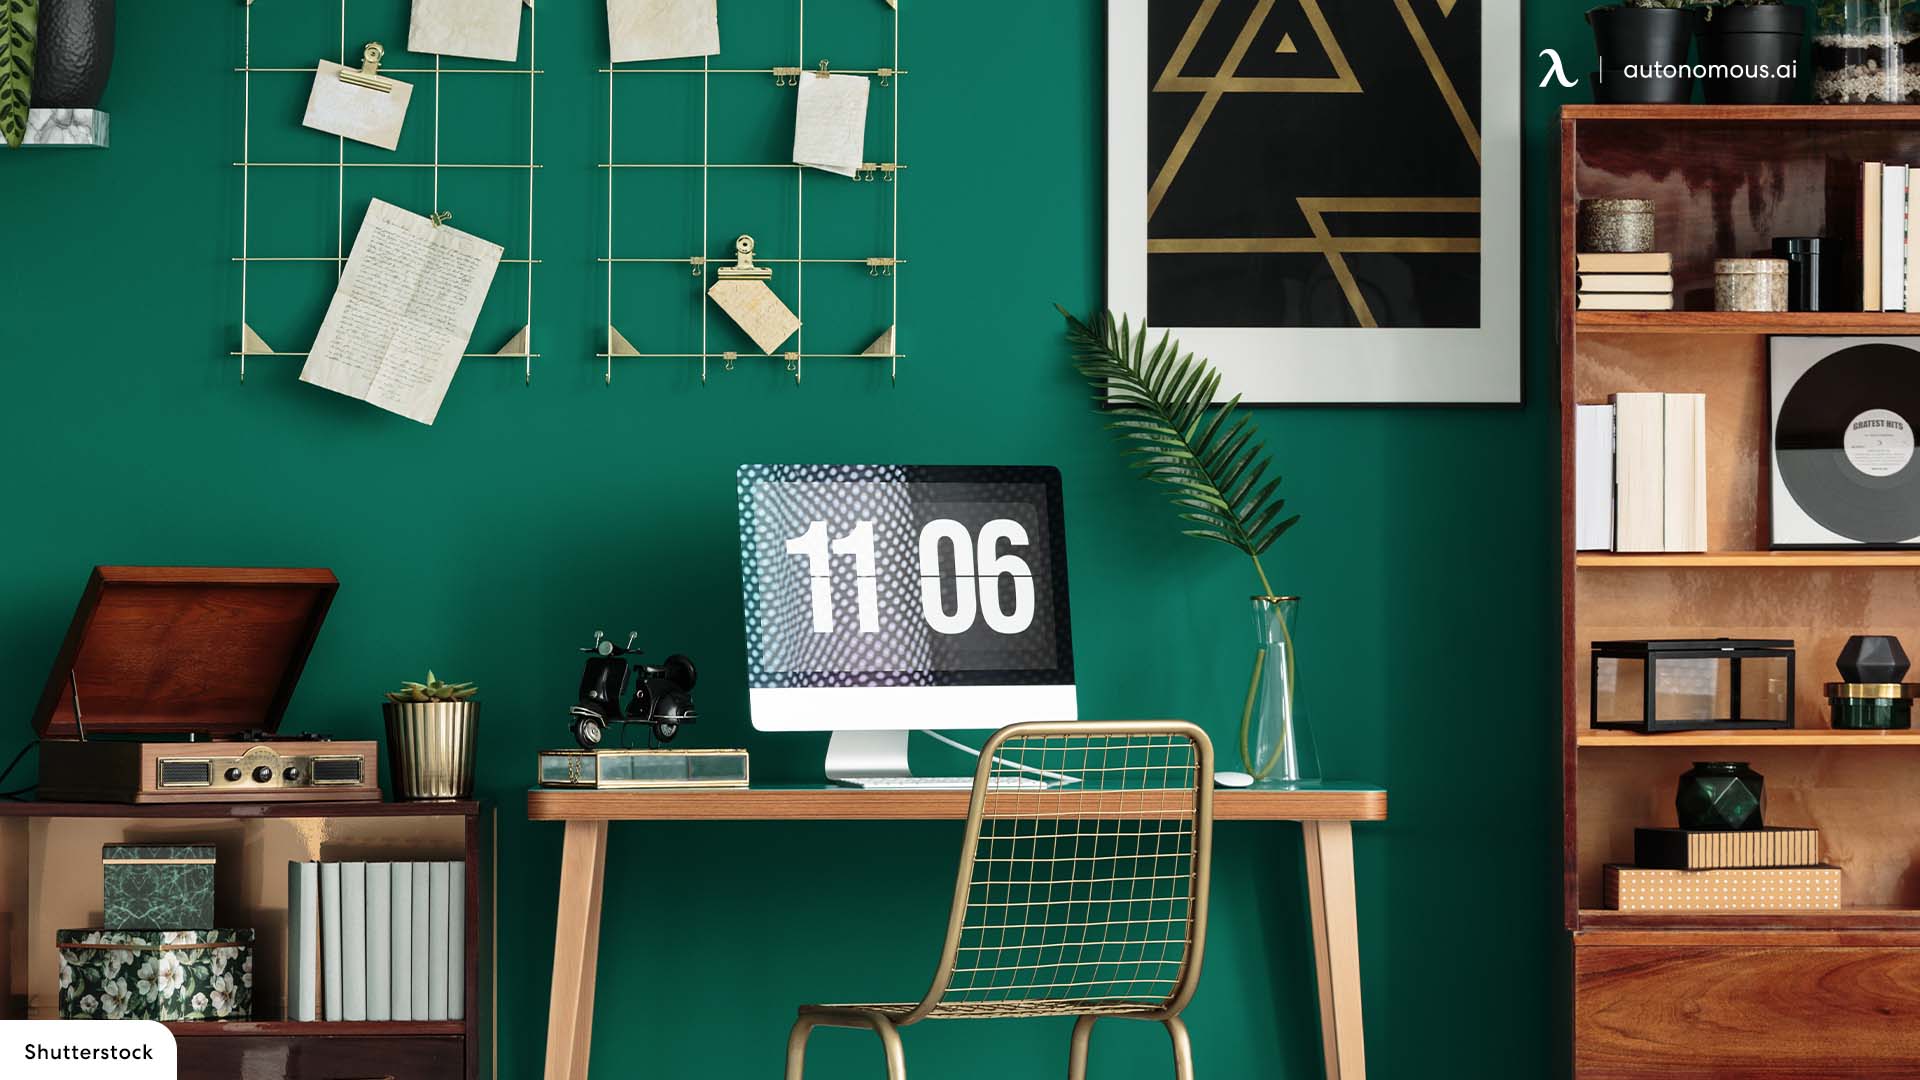 20 Cubicle Decor Ideas For Your Workspace - DIY for Offices. - DECORHUBNG